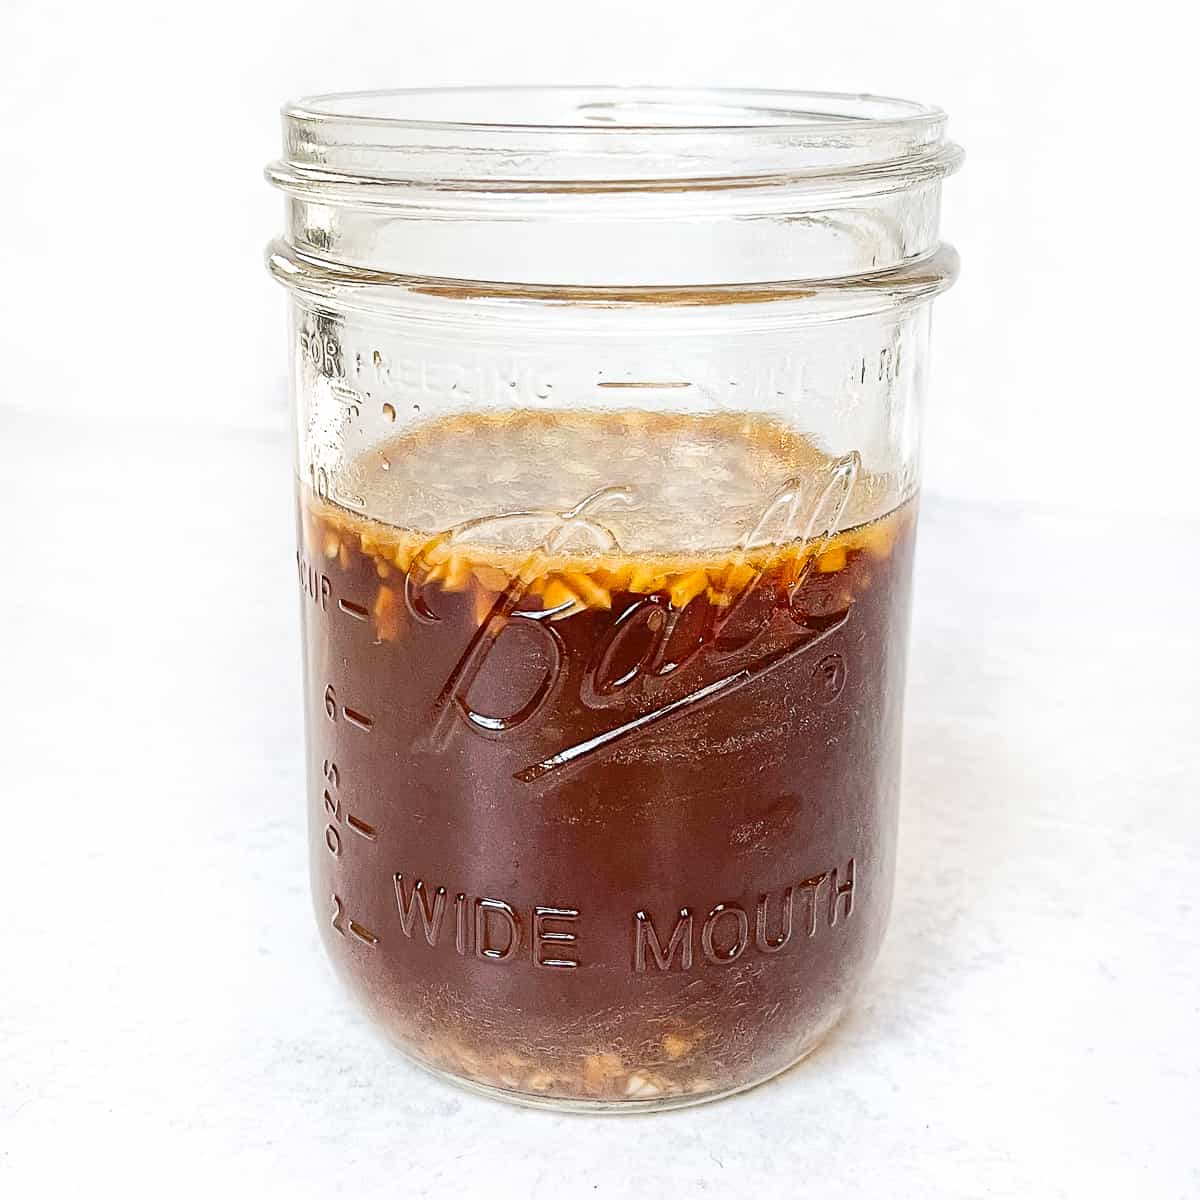 stir fry sauce made and stored in a wide mouth mason jar